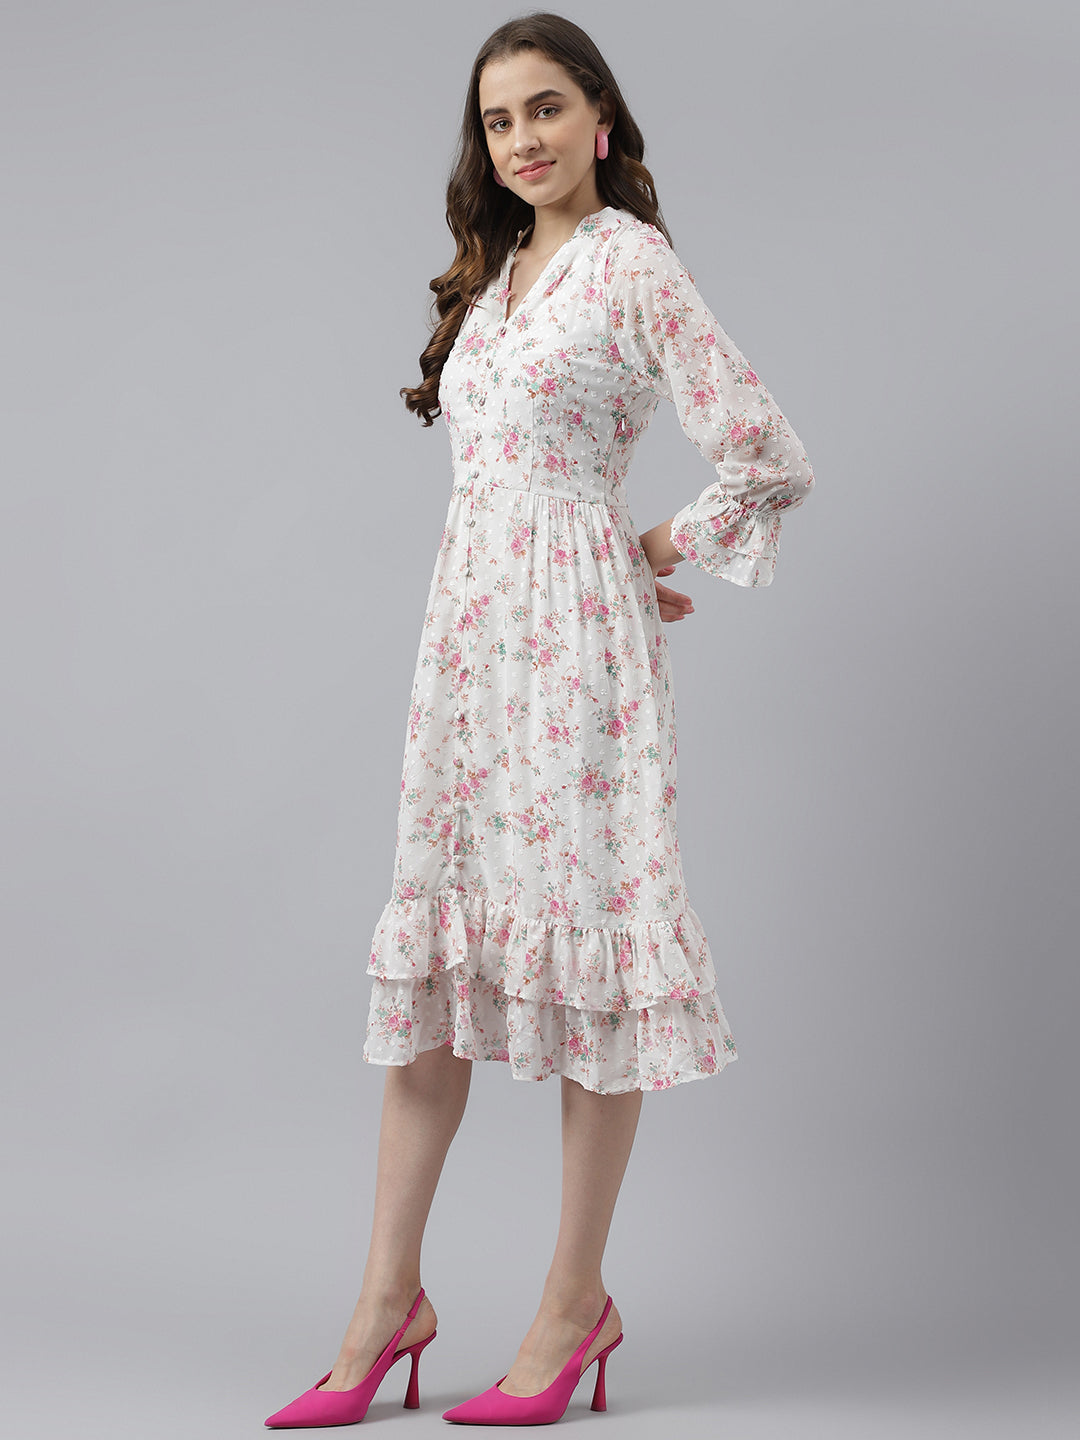 Pink Floral Printed Flute Sleeves High Waist Layered Dress With Mandarin Collar